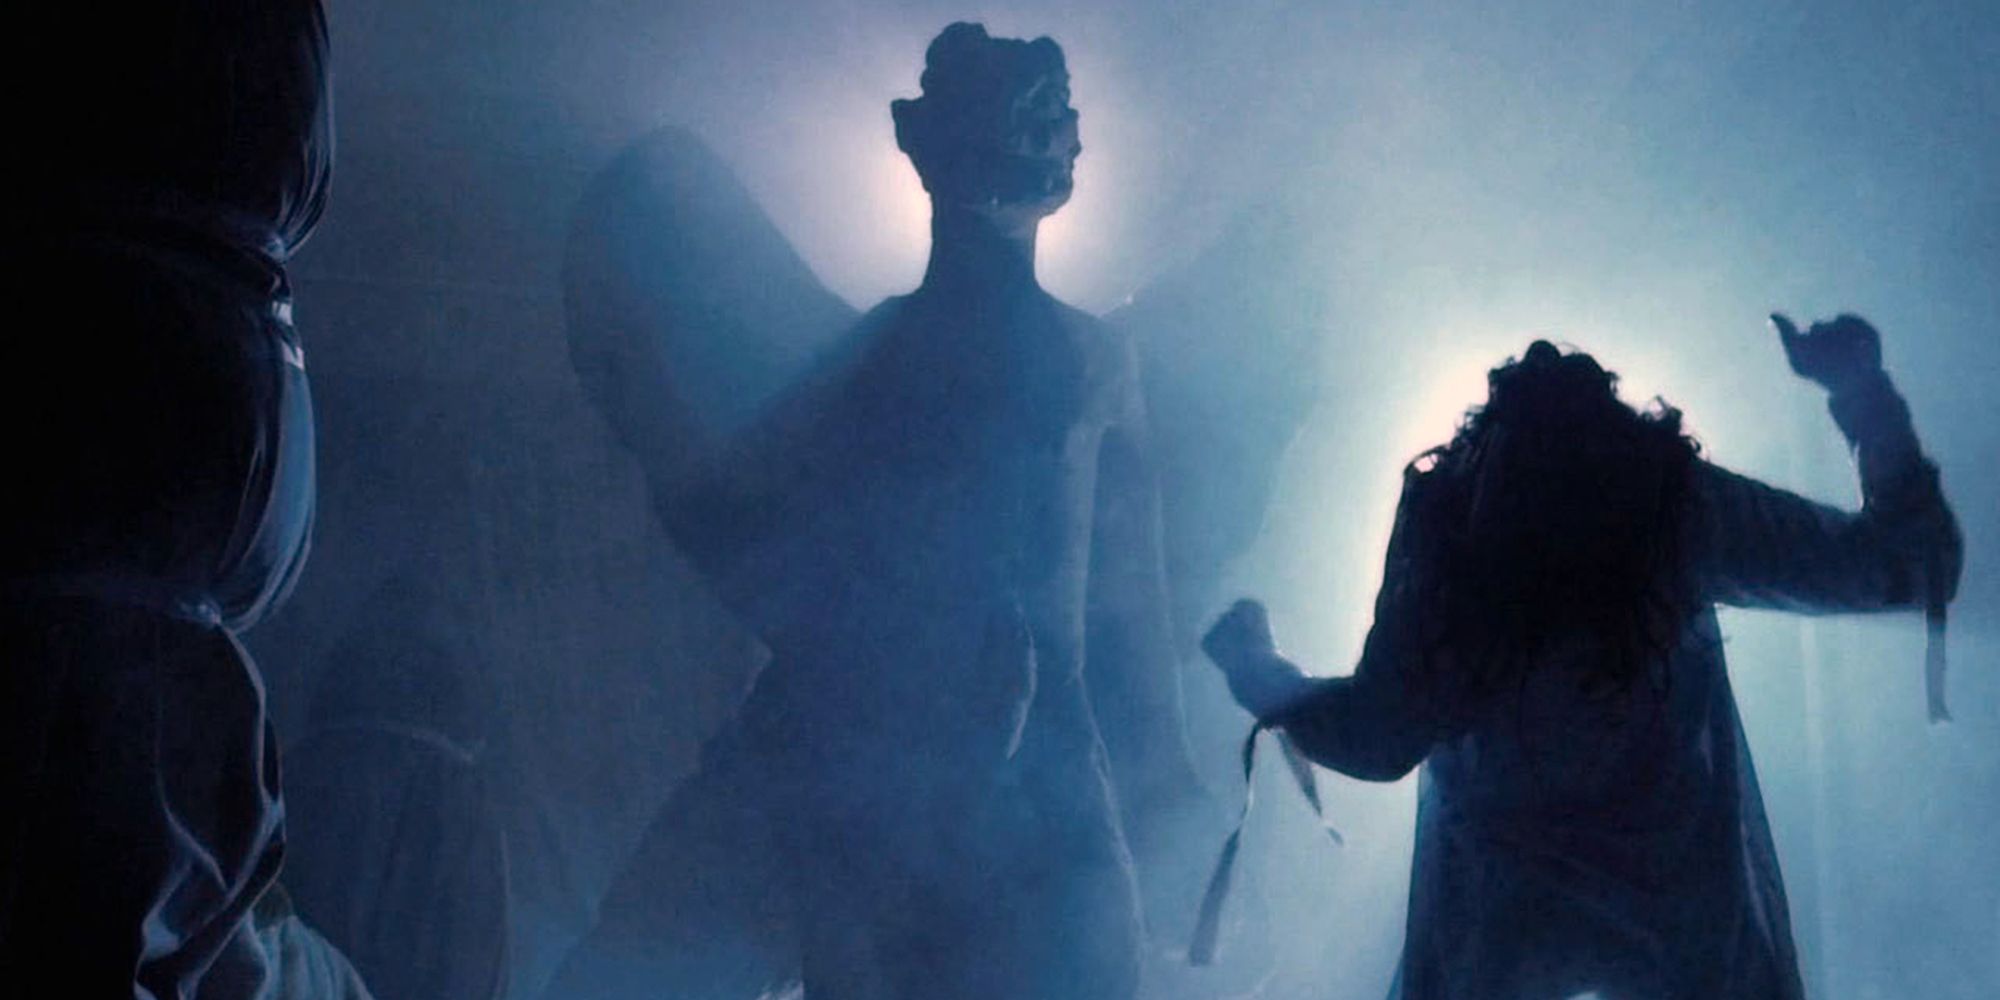 'The Exorcist curse' has become lore and adds to the movie's fright factor